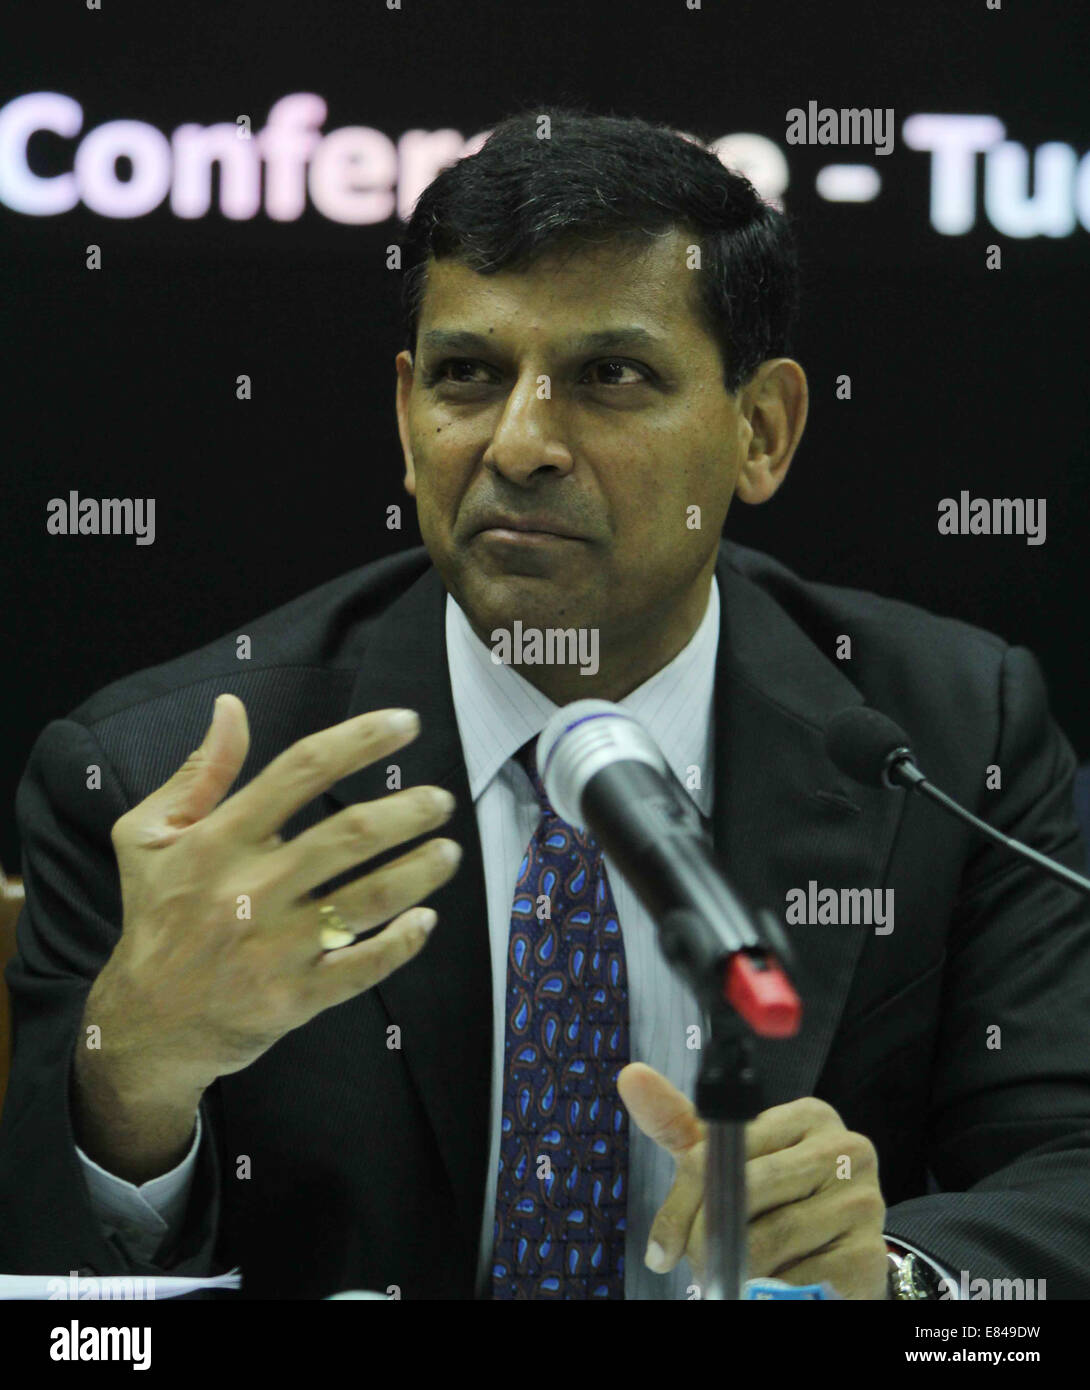 Mumbai, India. 30th Sep, 2014. India's central bank Reserve Bank of India Governor Raghuram Rajan speaks before meeting with the bankers for RBI monetary policy review at RBI headquarters in Mumbai, India, Sept. 30, 2014. The Reserve Bank of India (RBI) Tuesday decided to keep key interest rates unchanged in its fourth bi-monthly policy review. Credit:  Stringer/Xinhua/Alamy Live News Stock Photo